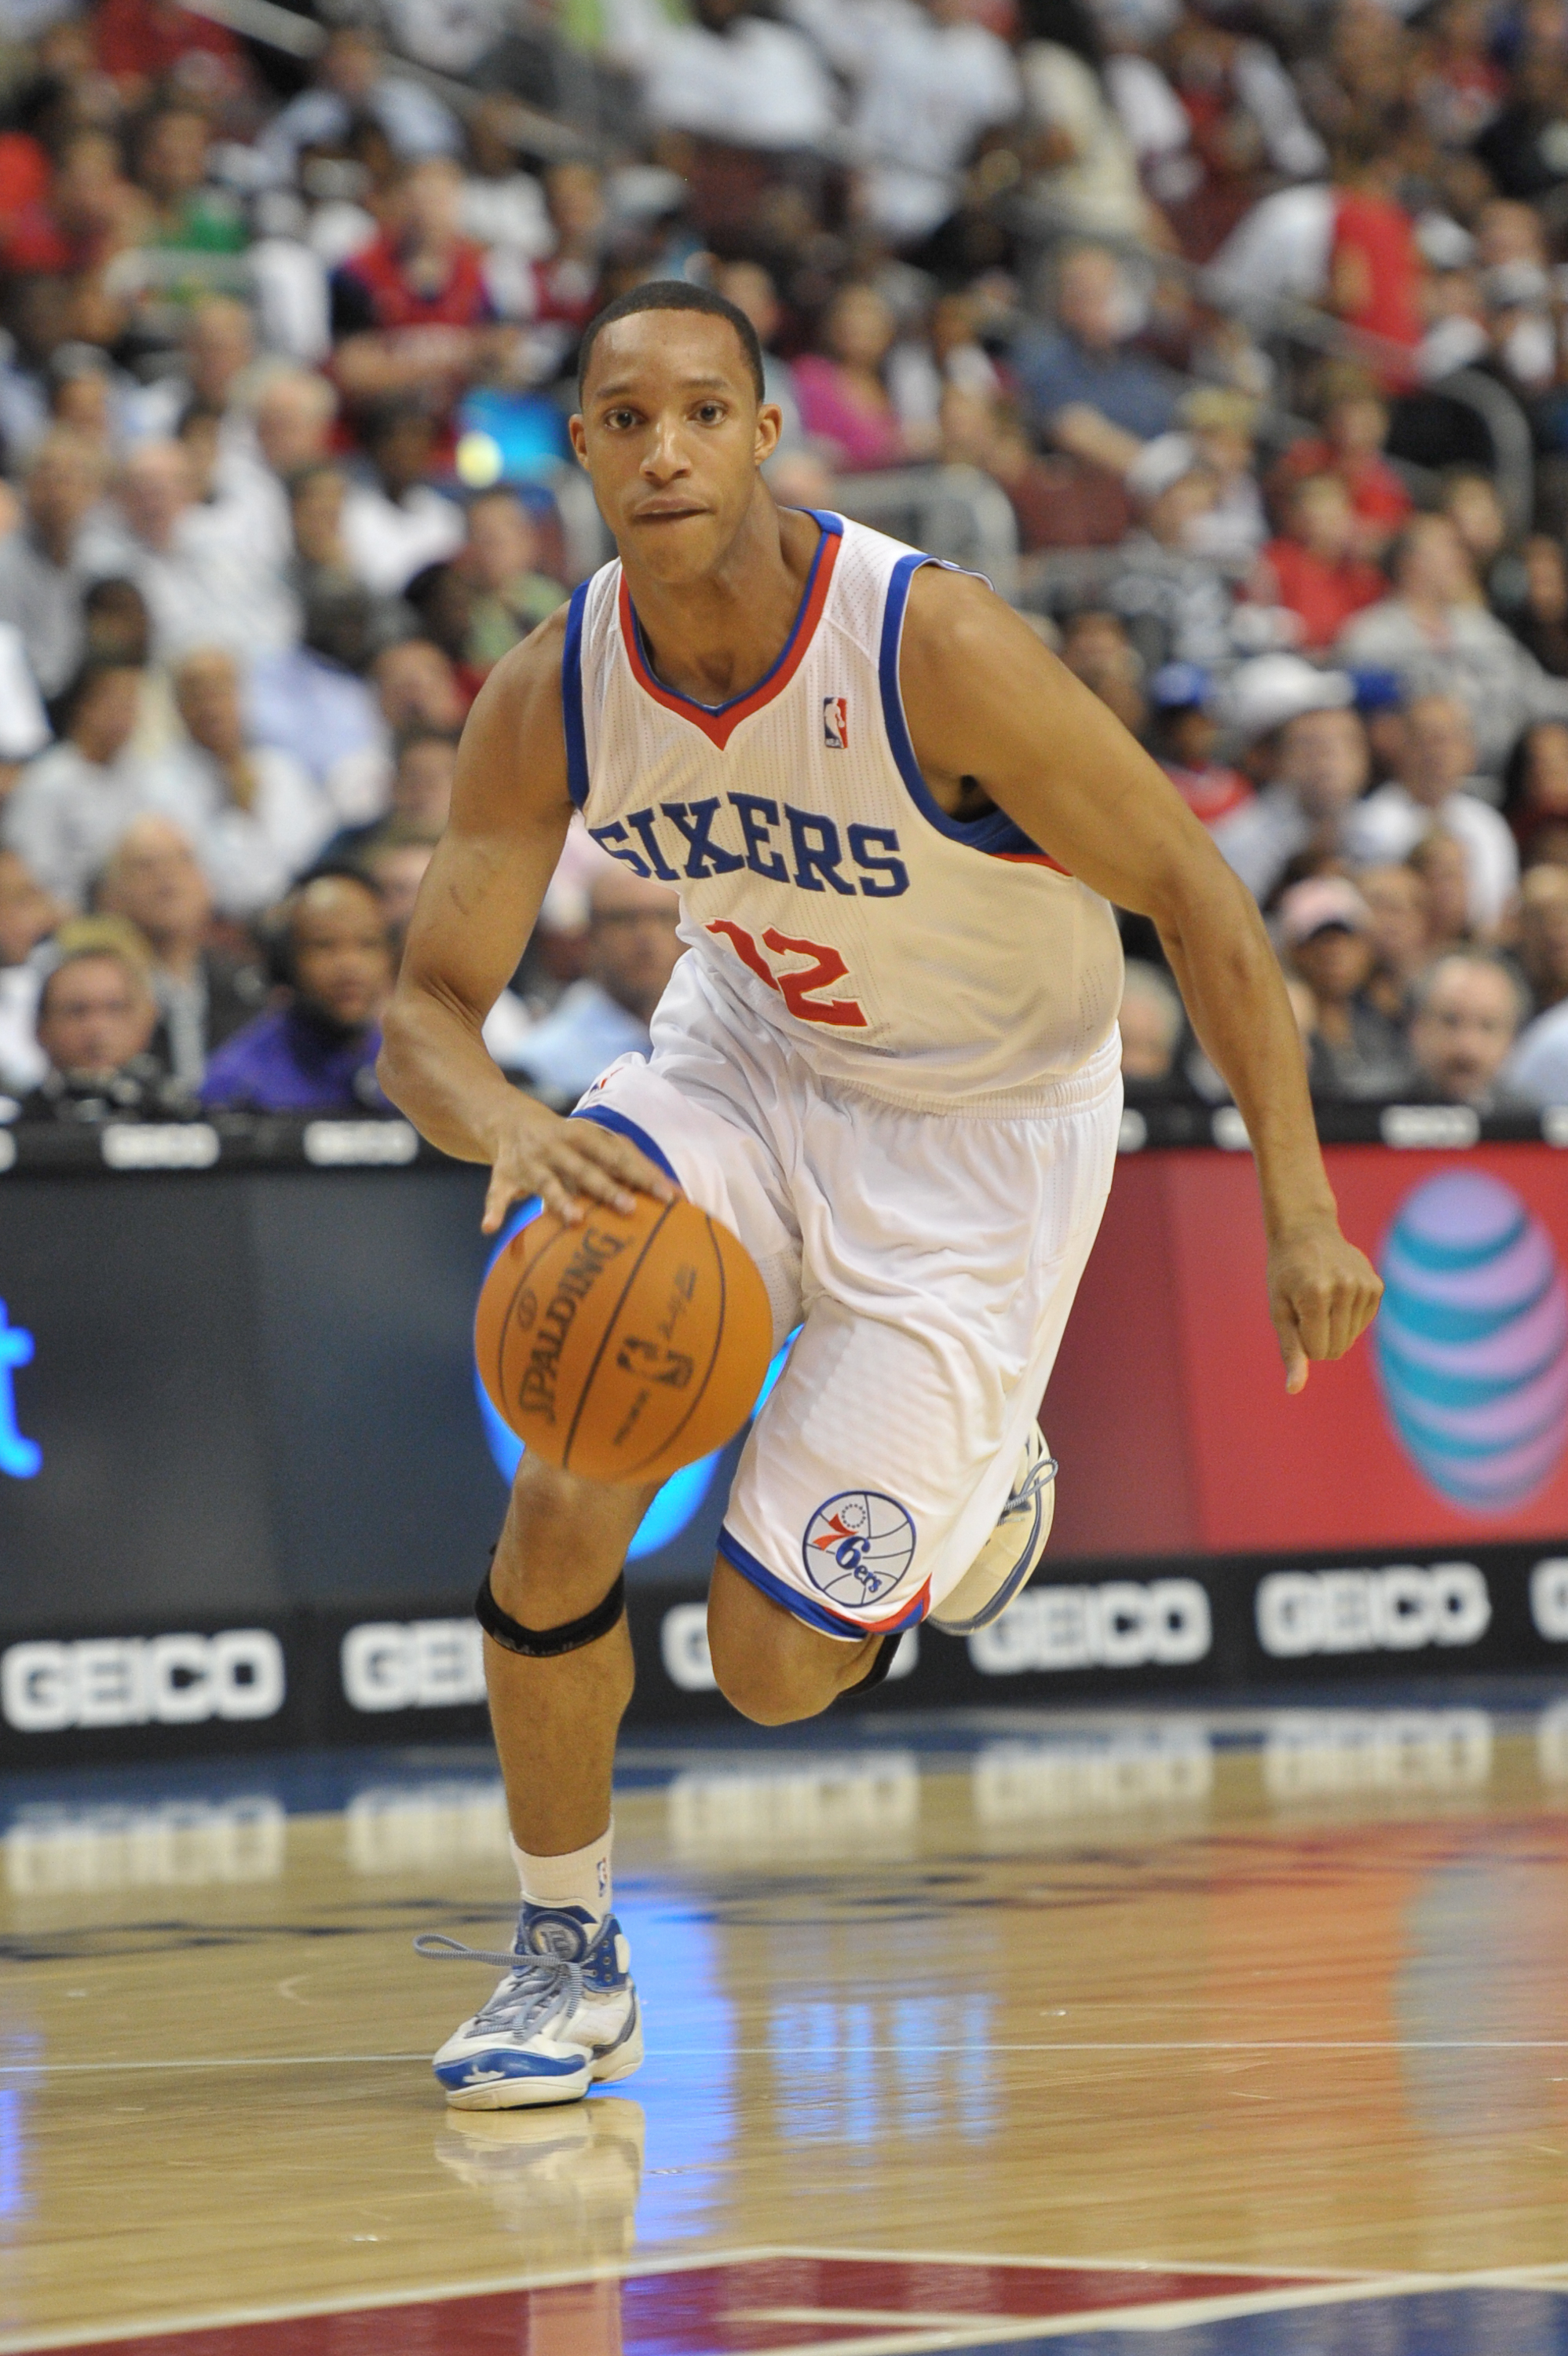 PHILADELPHIA - OCTOBER 27: Evan Turner #12 of the Philadelphia 76ers in action during the game against the Miami Heat at the Wells Fargo Center on October 27, 2010 in Philadelphia, Pennsylvania. NOTE TO USER: User expressly acknowledges and agrees that, b